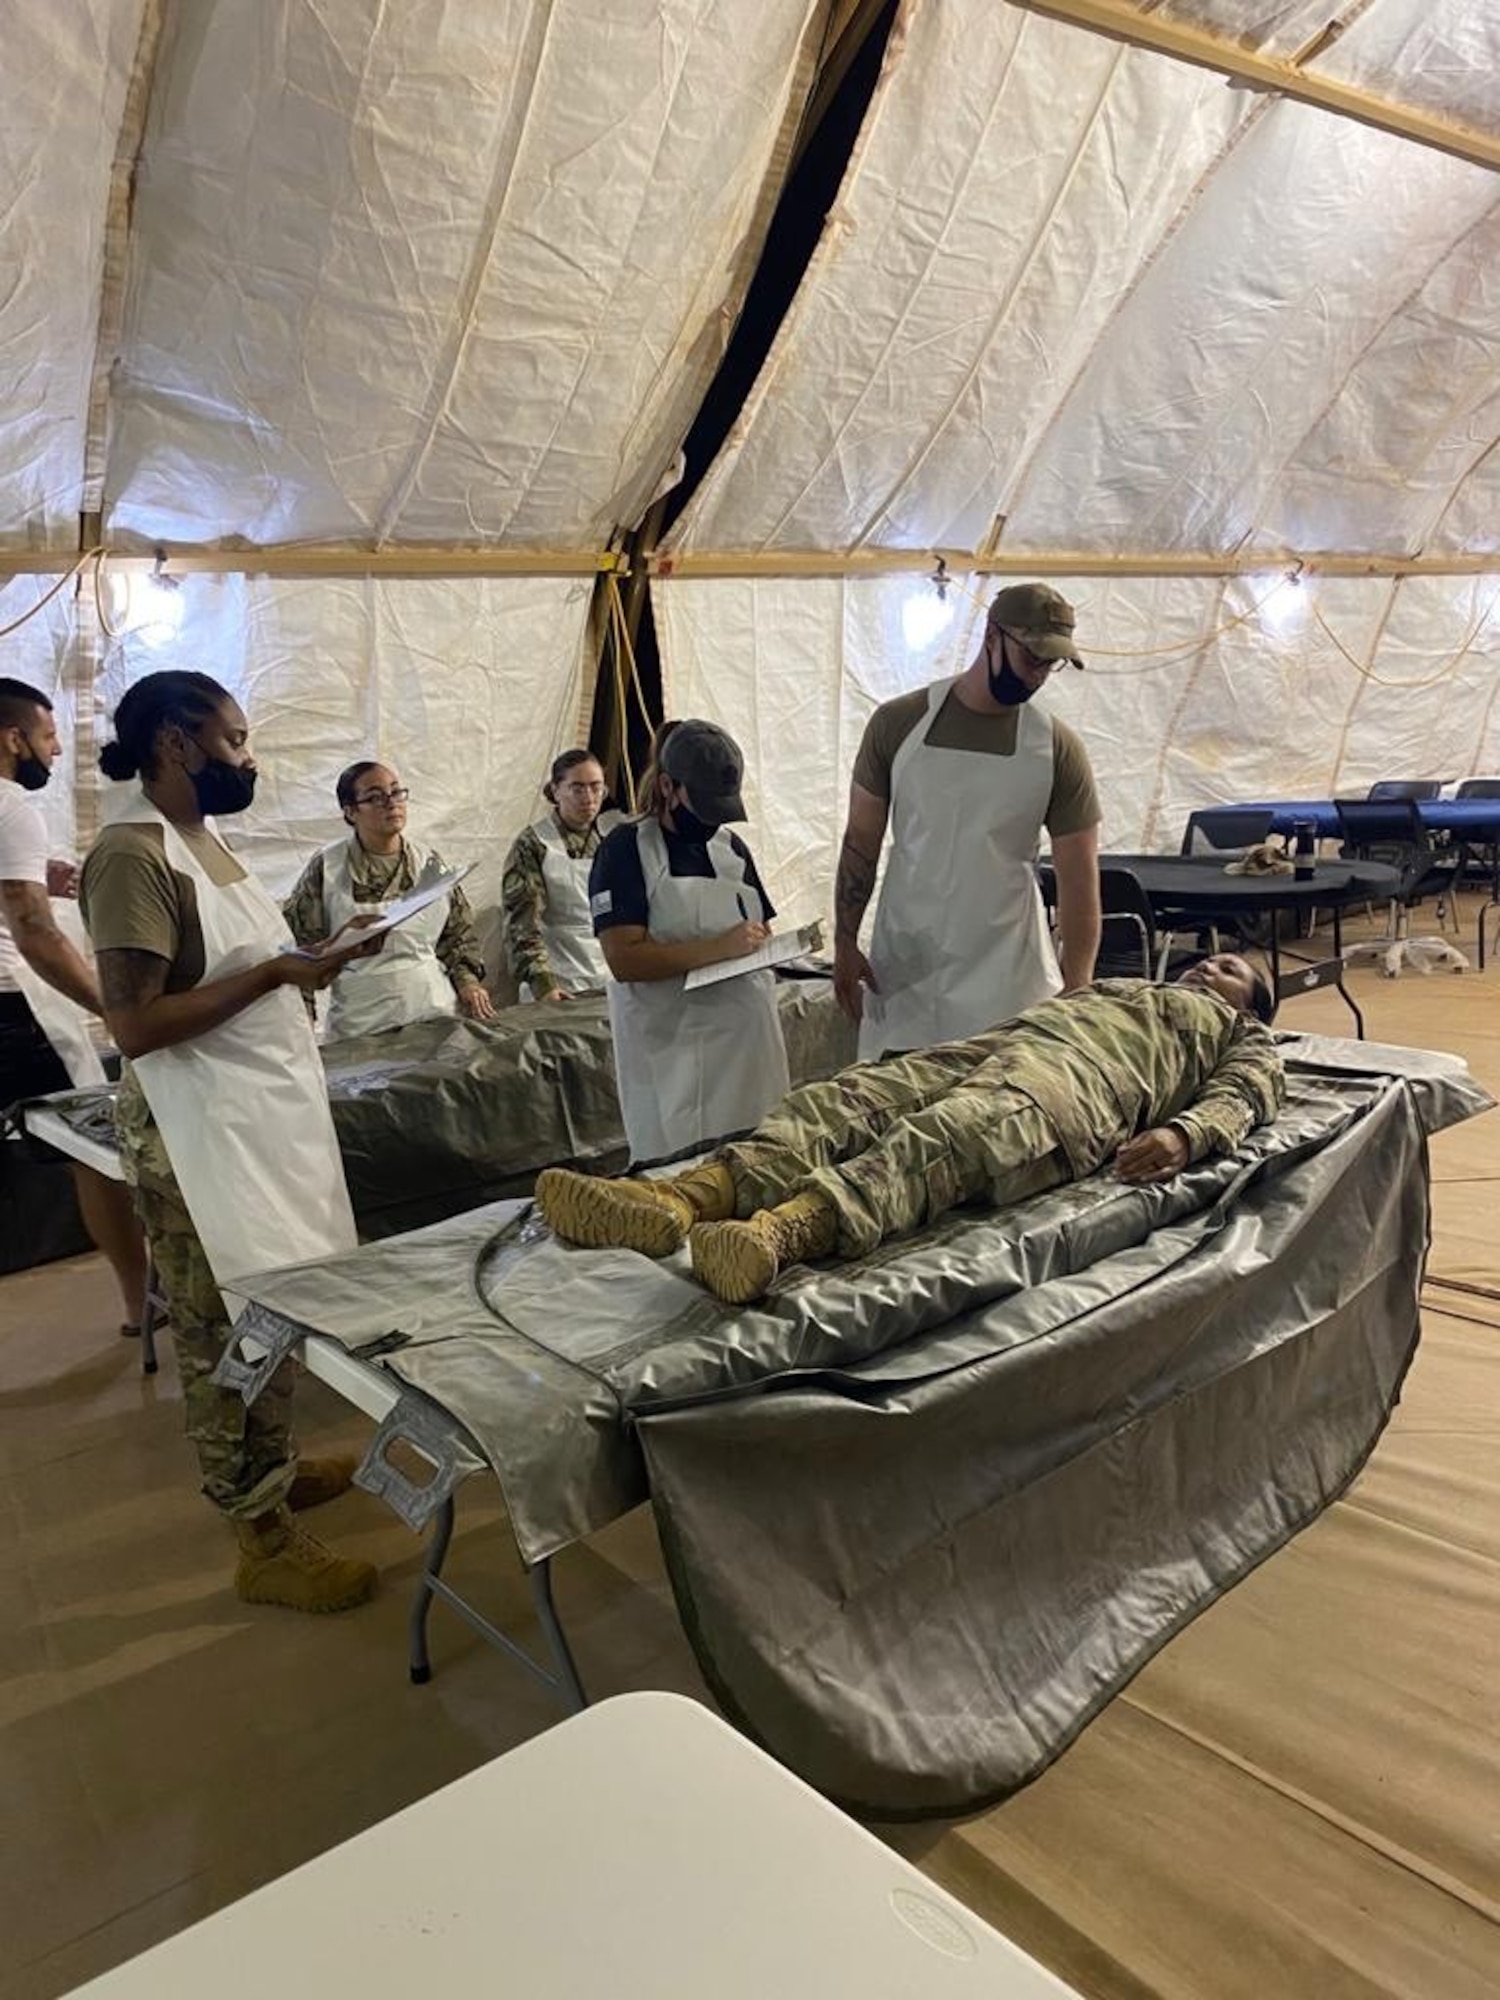 U.S. Airmen from the 768th Expeditionary Air Base Squadron Mortuary Affairs team exercises processing the remains during a short-notice exercise at Nigerian Air Base 101, Niamey, Niger, Oct. 9, 2020.